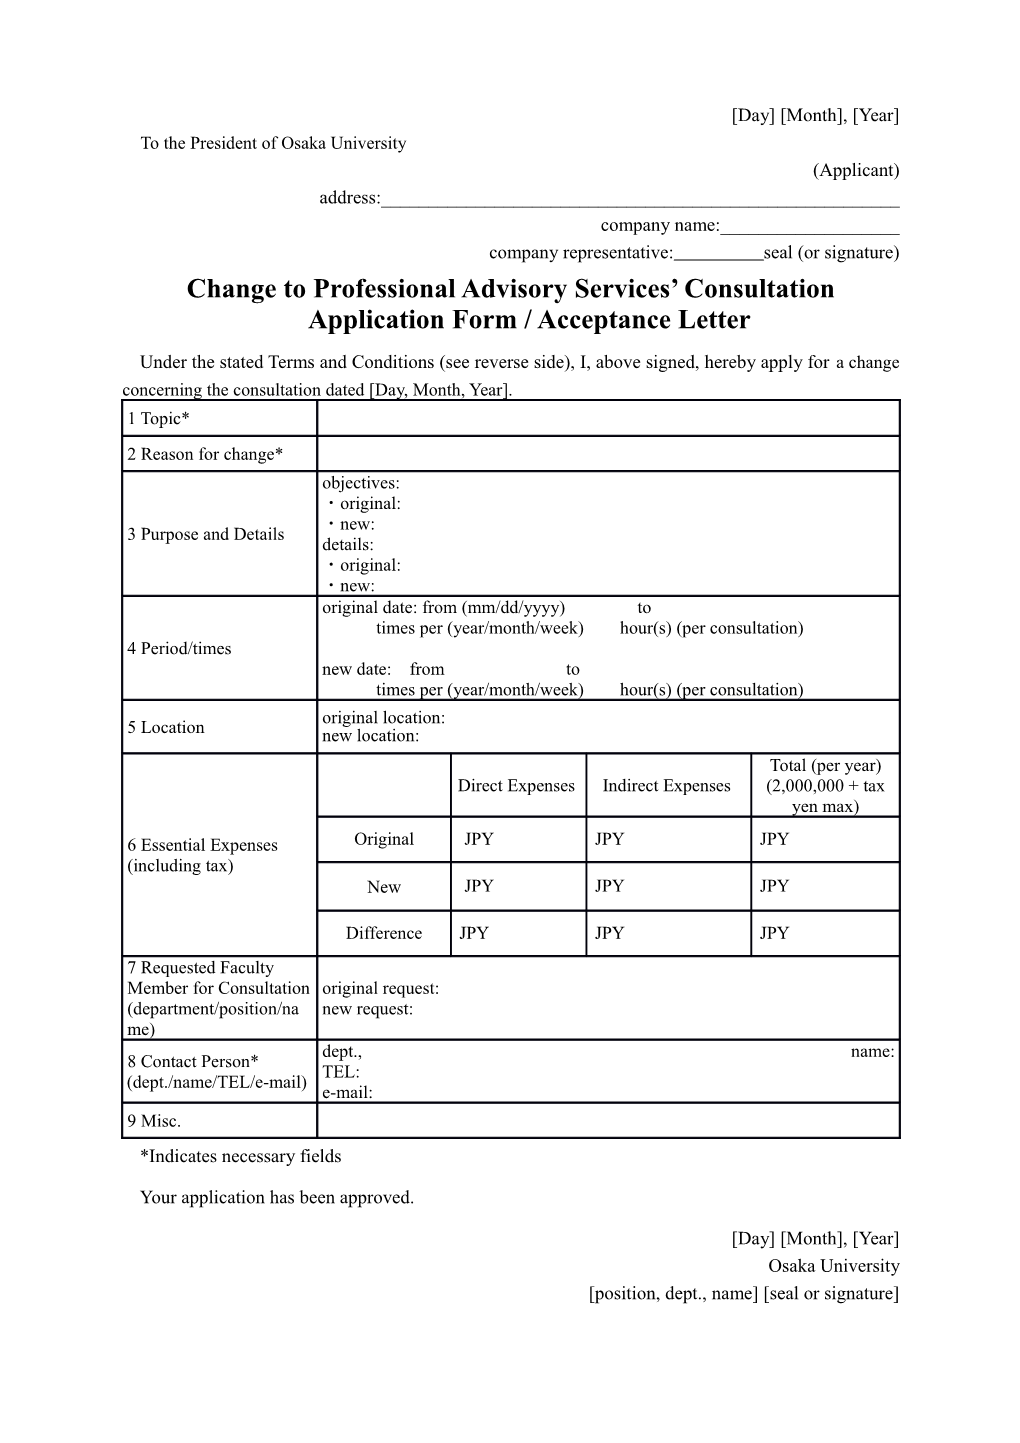 Change to Professional Advisory Services Consultation Application Form / Acceptance Letter